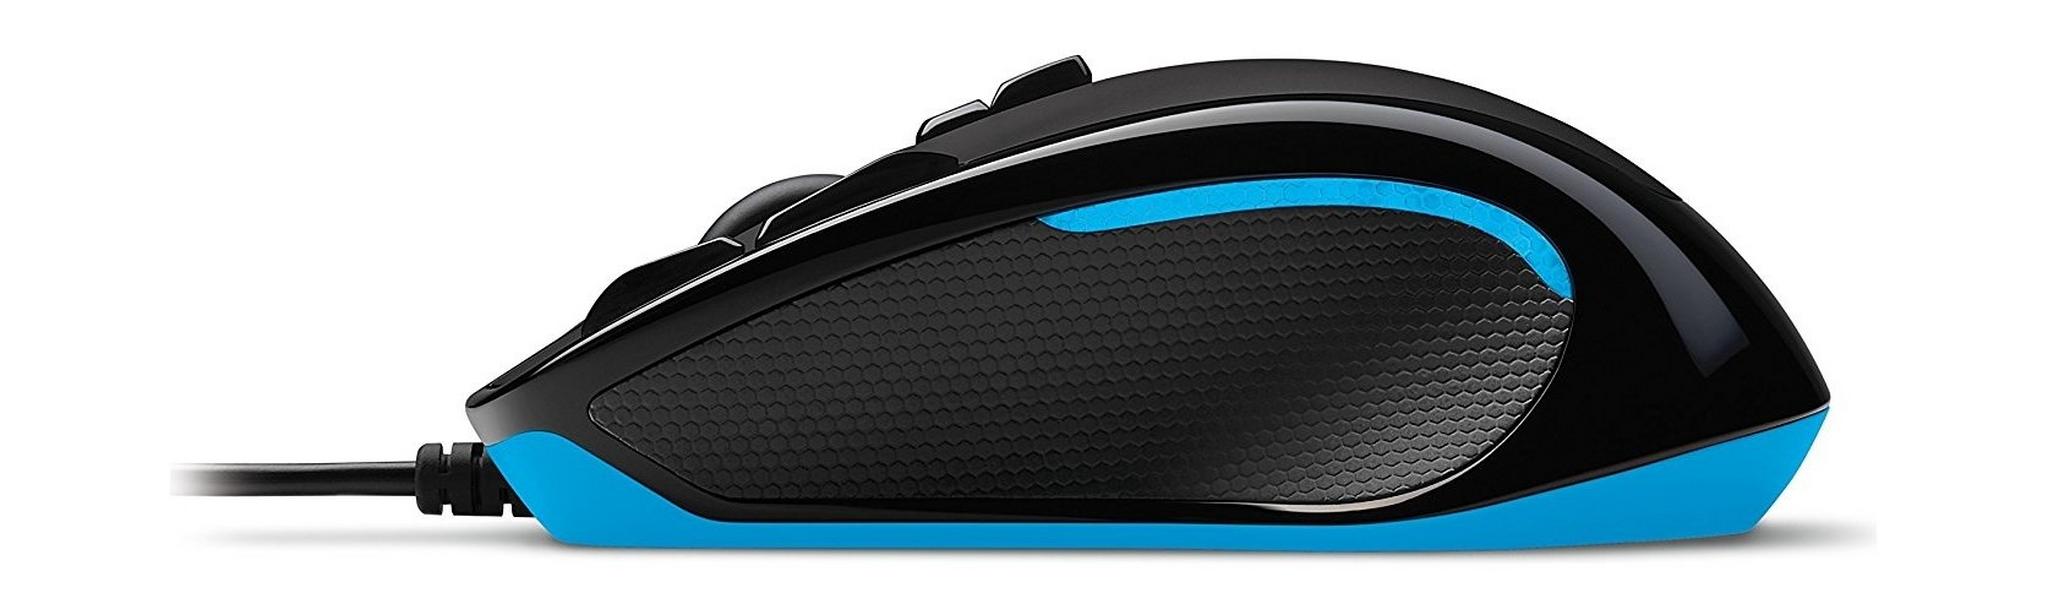 Logitech G300s Optical Ambidextrous Wired Gaming Mouse - Black